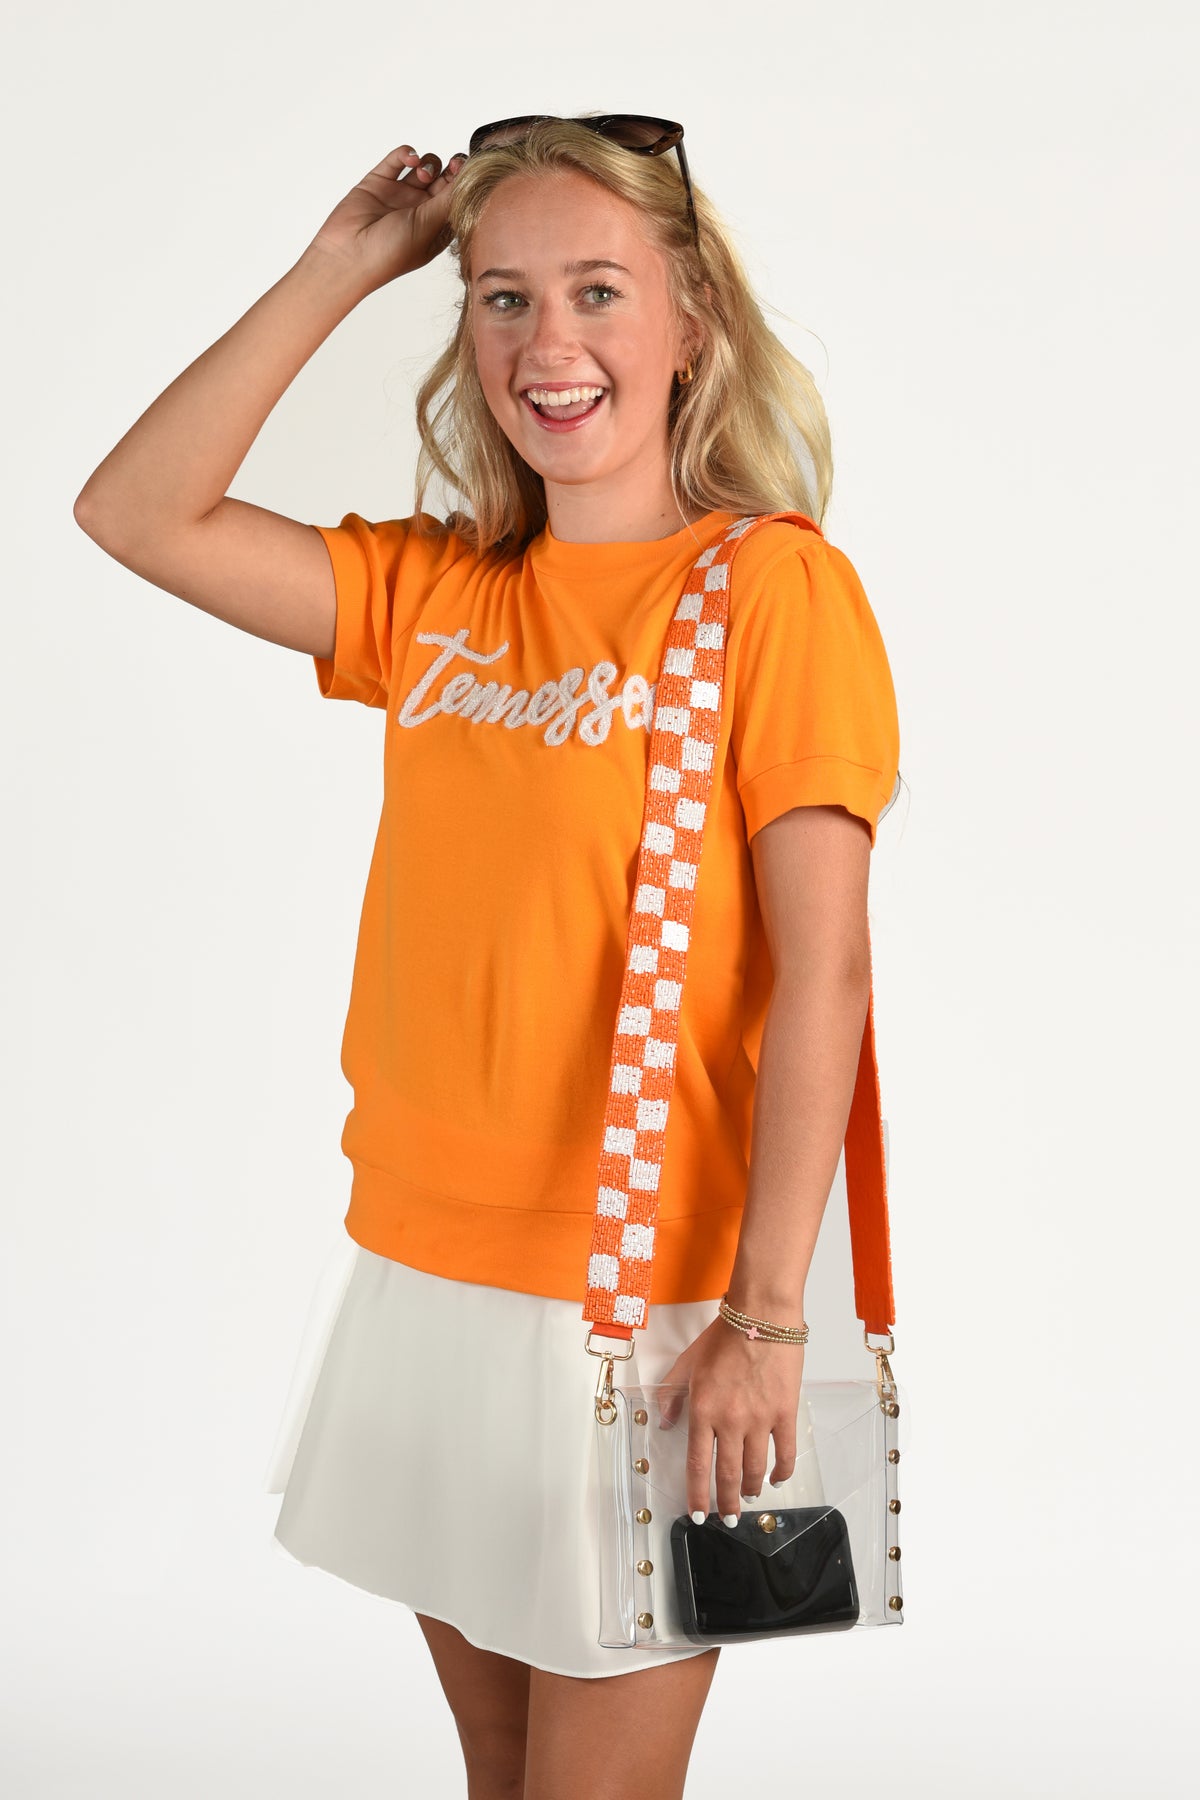 TENNESSEE SCRIPT TOP